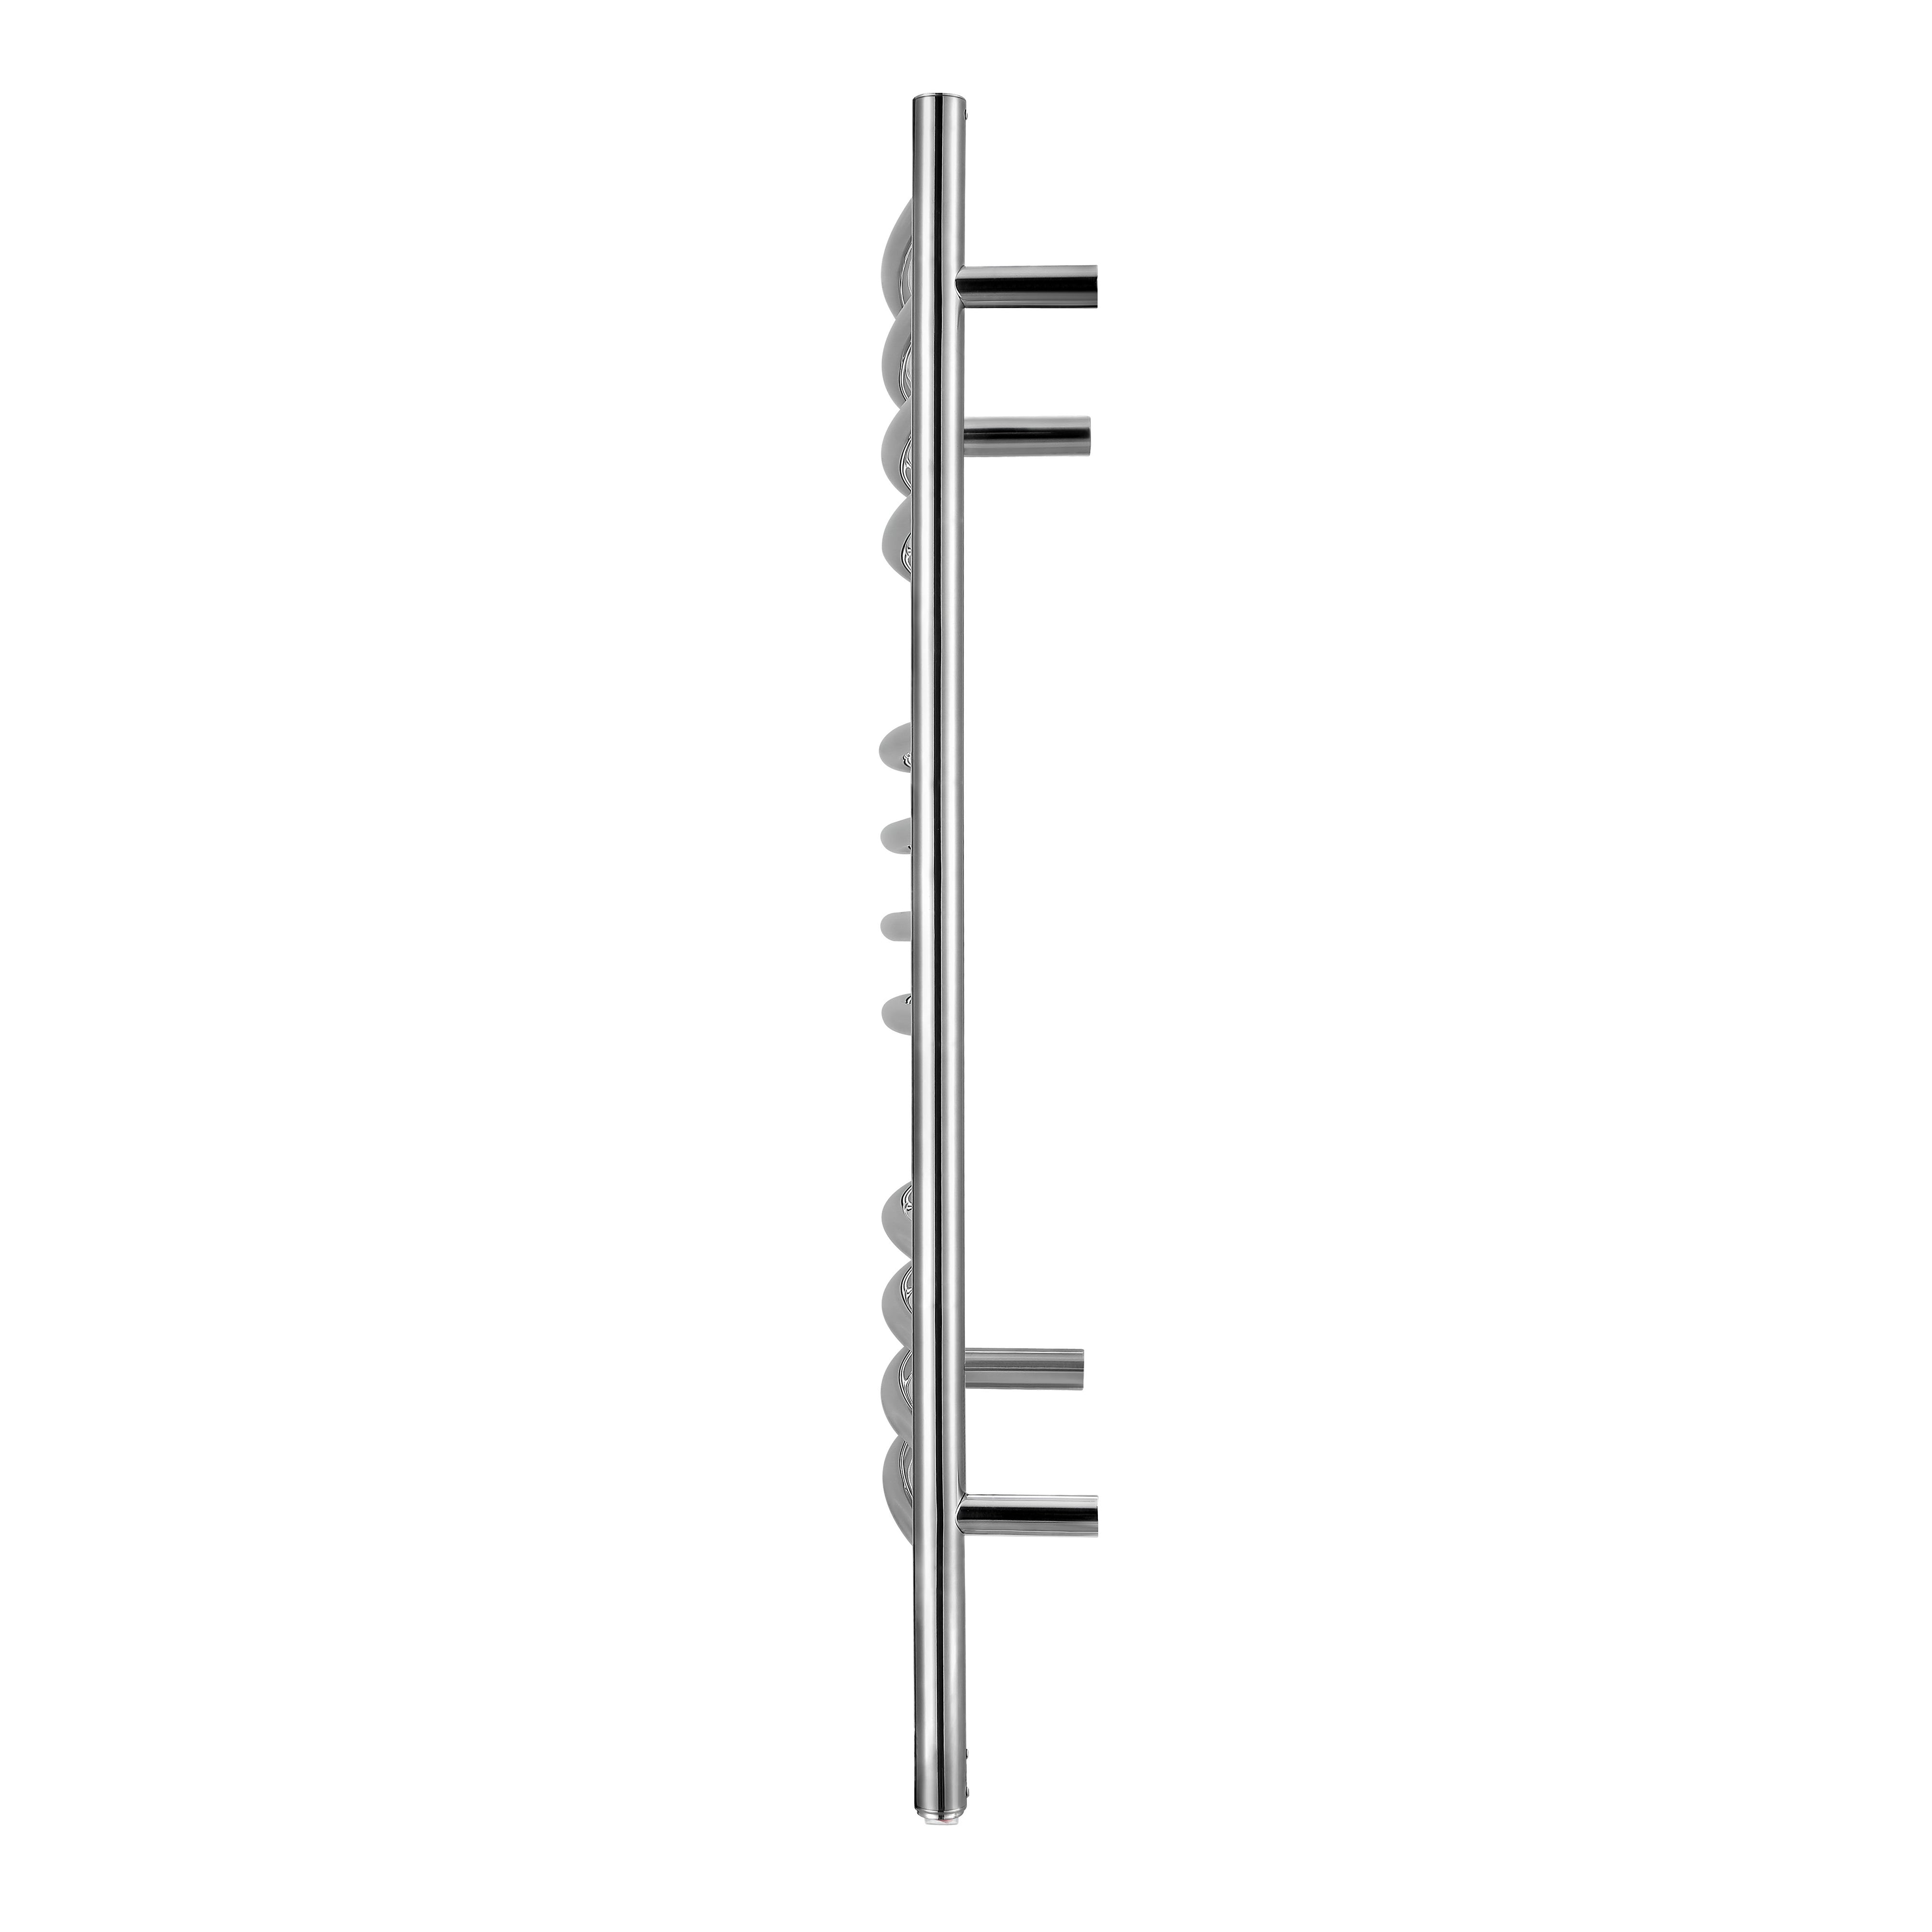 Lustra OBT 12 Bar Dual Wall Mount Towel Warmer with On-Board Timer in Polished Stainless Steel